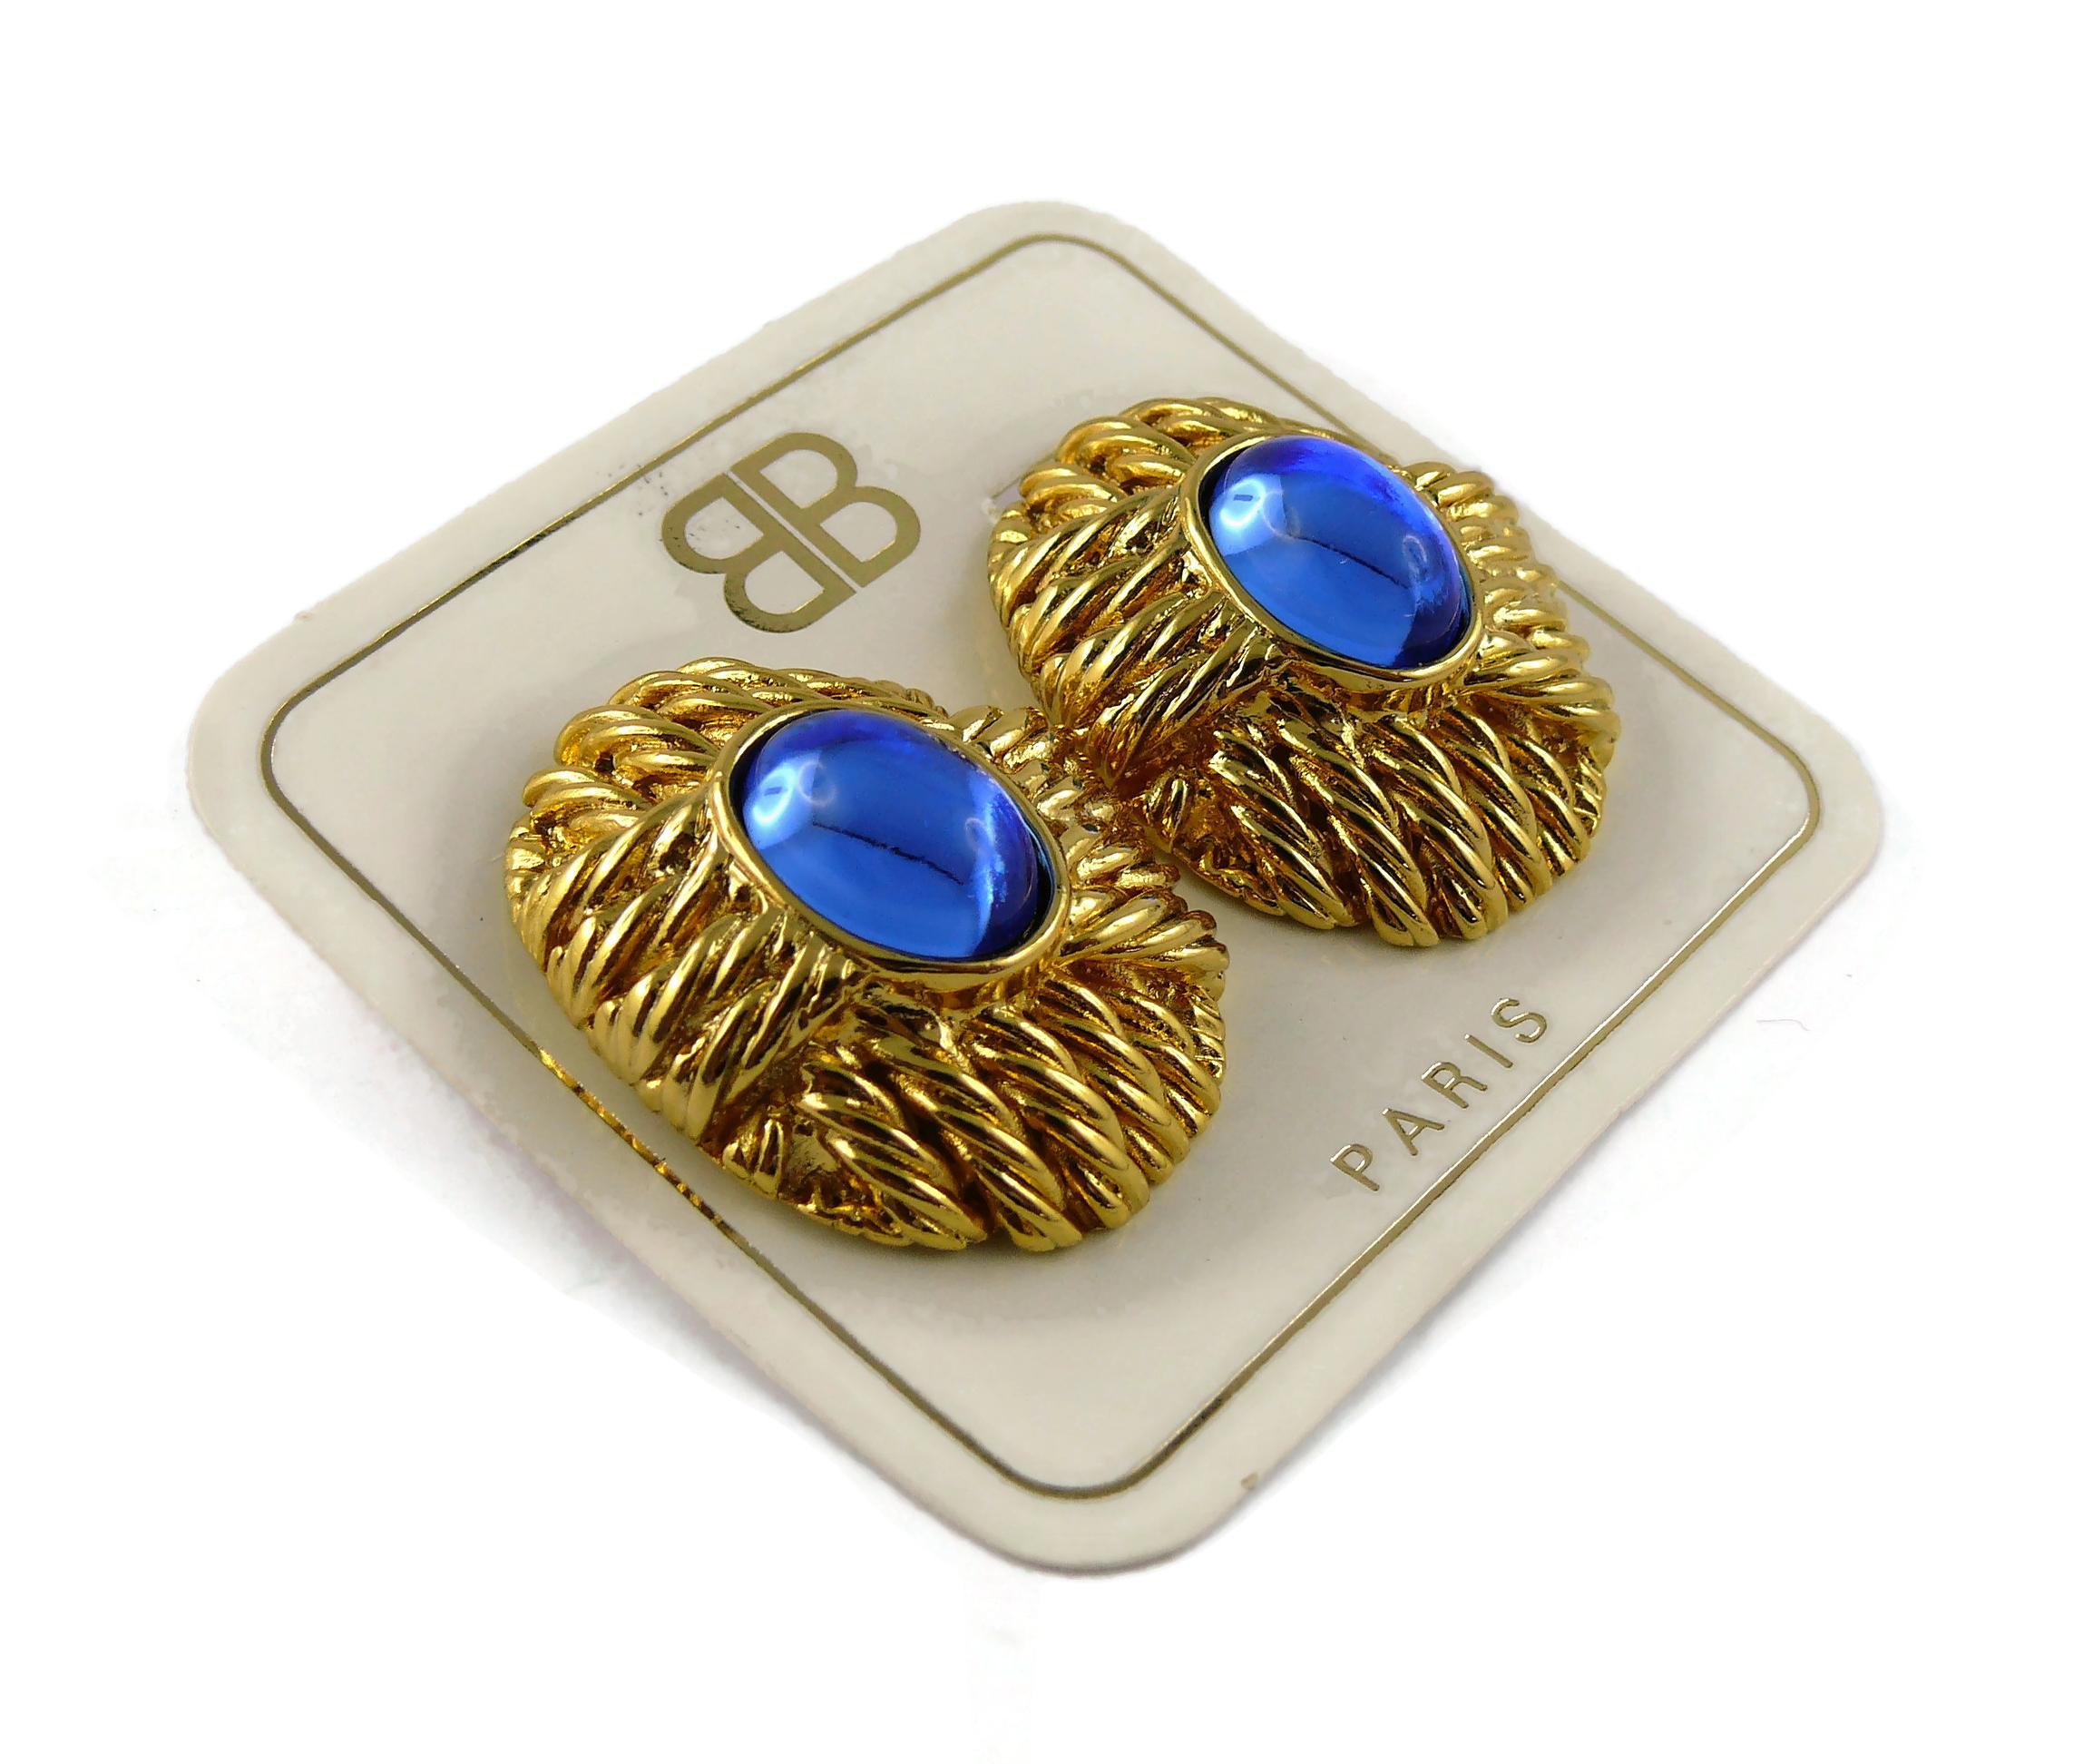 BALENCIAGA vintage gold toned clip-on earrings featuring a rope like design embellished with a sapphire blue glass cabochon at the center.

Embossed BALENCIAGA Paris.

Indicative measurements : height approx. 3.3 cm (1.30 inches) / max. width